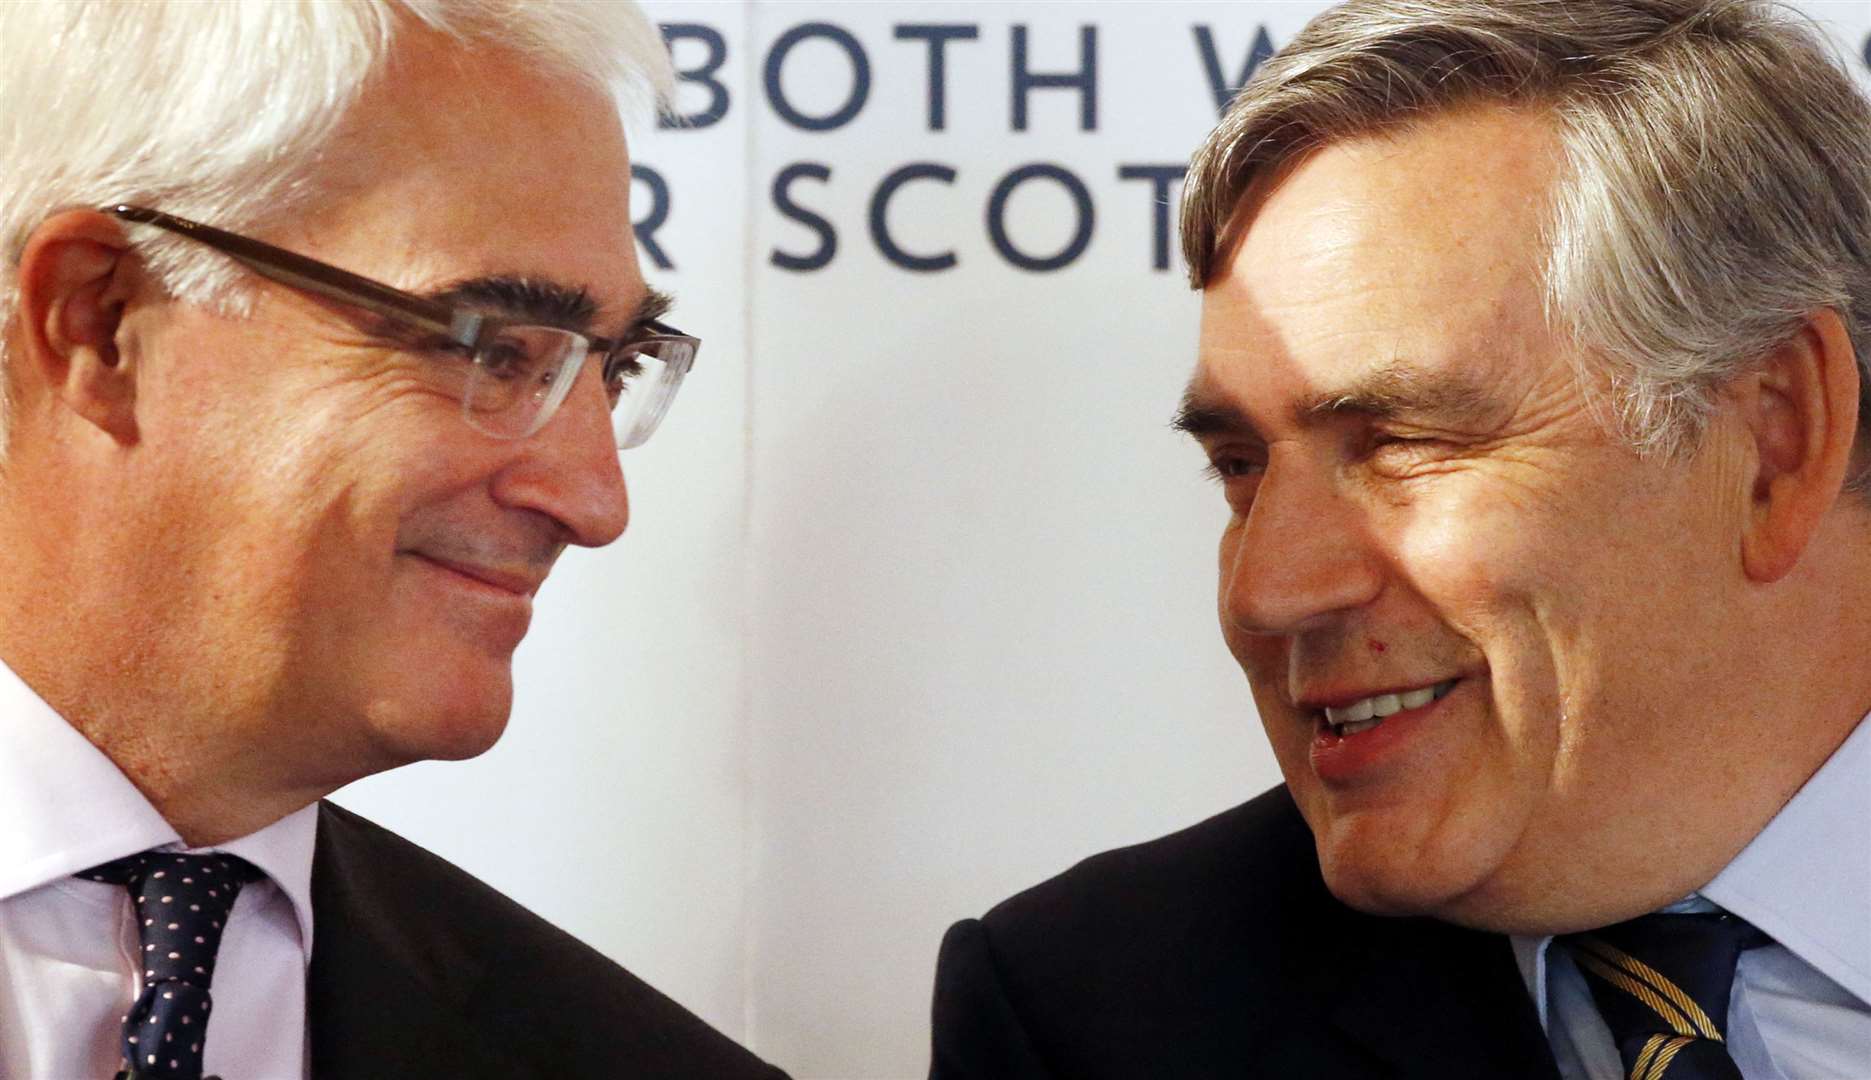 Gordon Brown made Alistair Darling his chancellor when he became prime minister (Danny Lawson/PA)